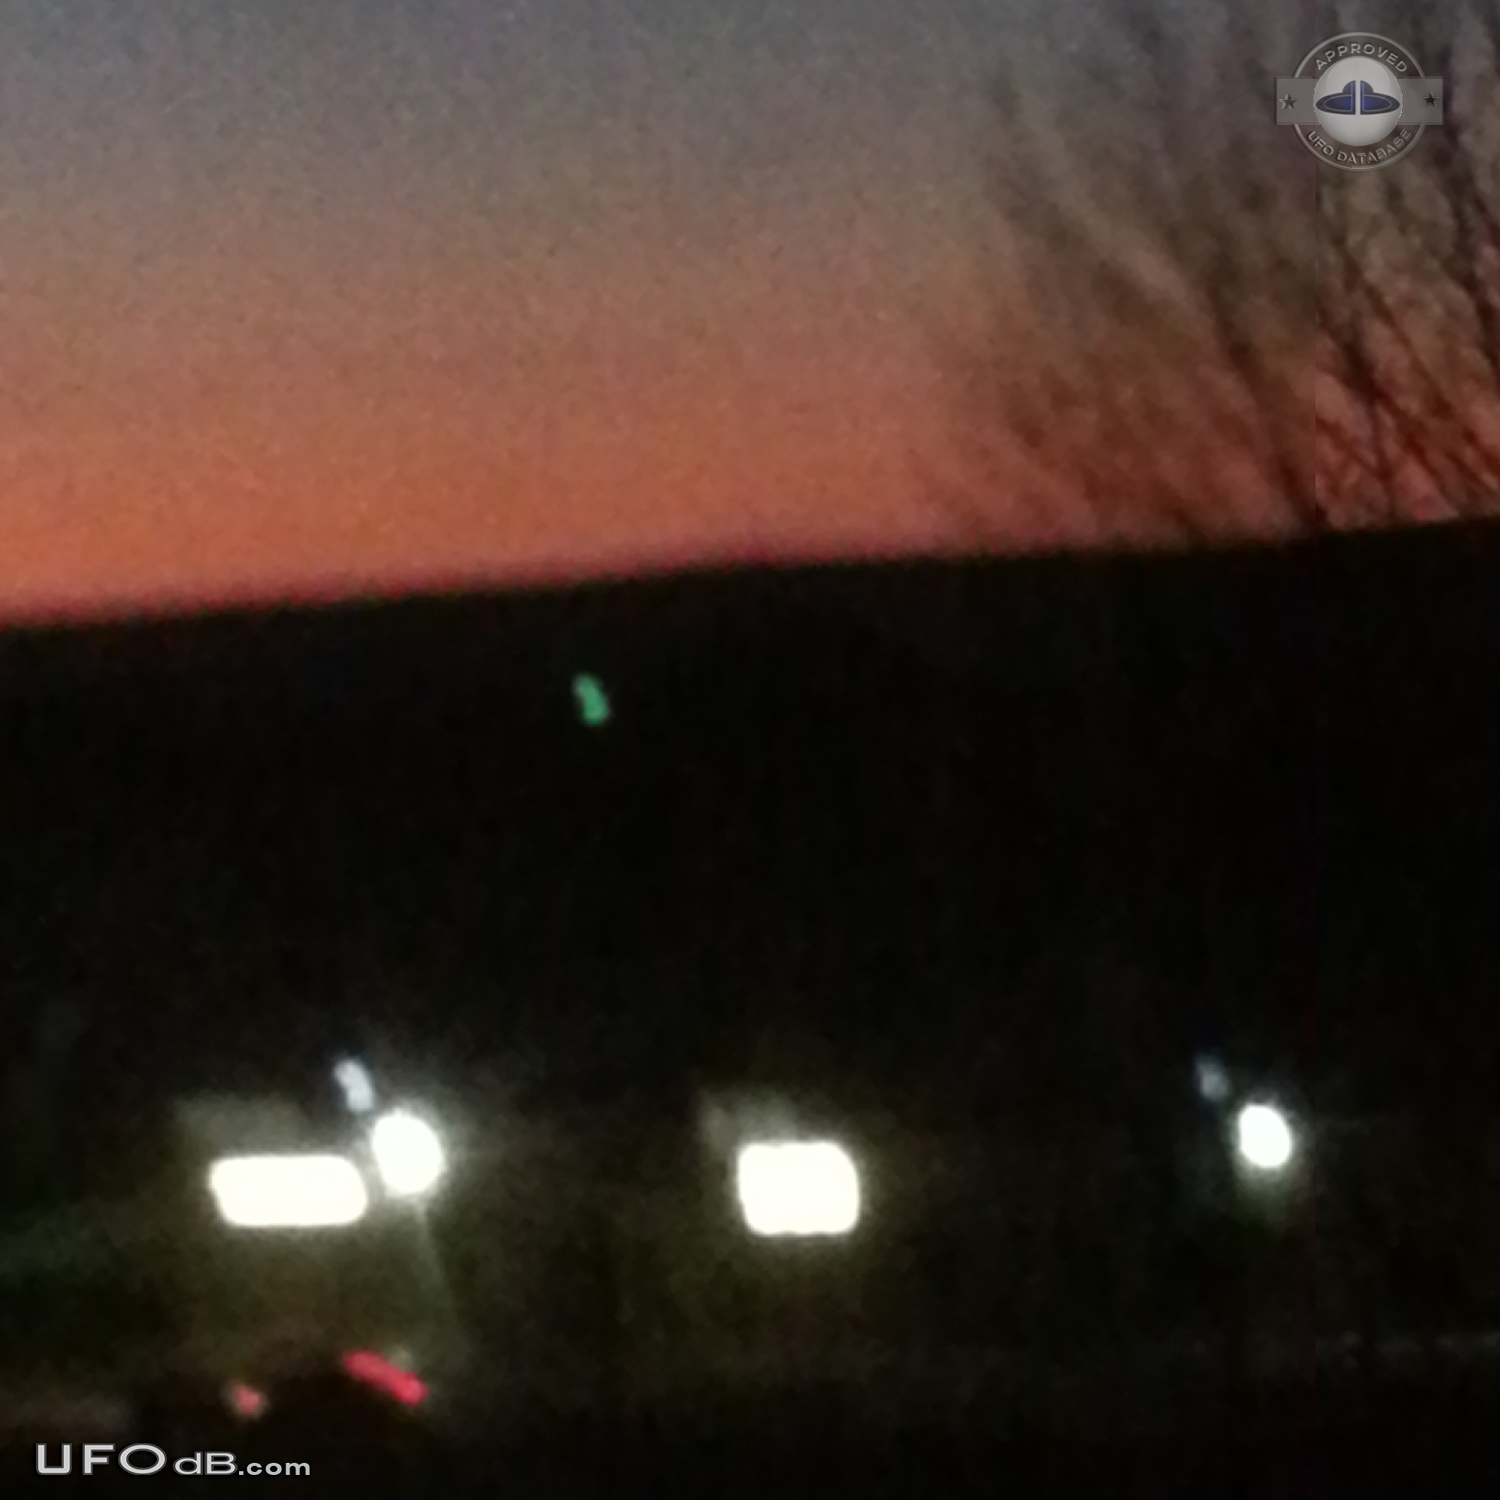 Rare event - Incredible Day and Night pictures of same UFO USA 2012 UFO Picture #509-2